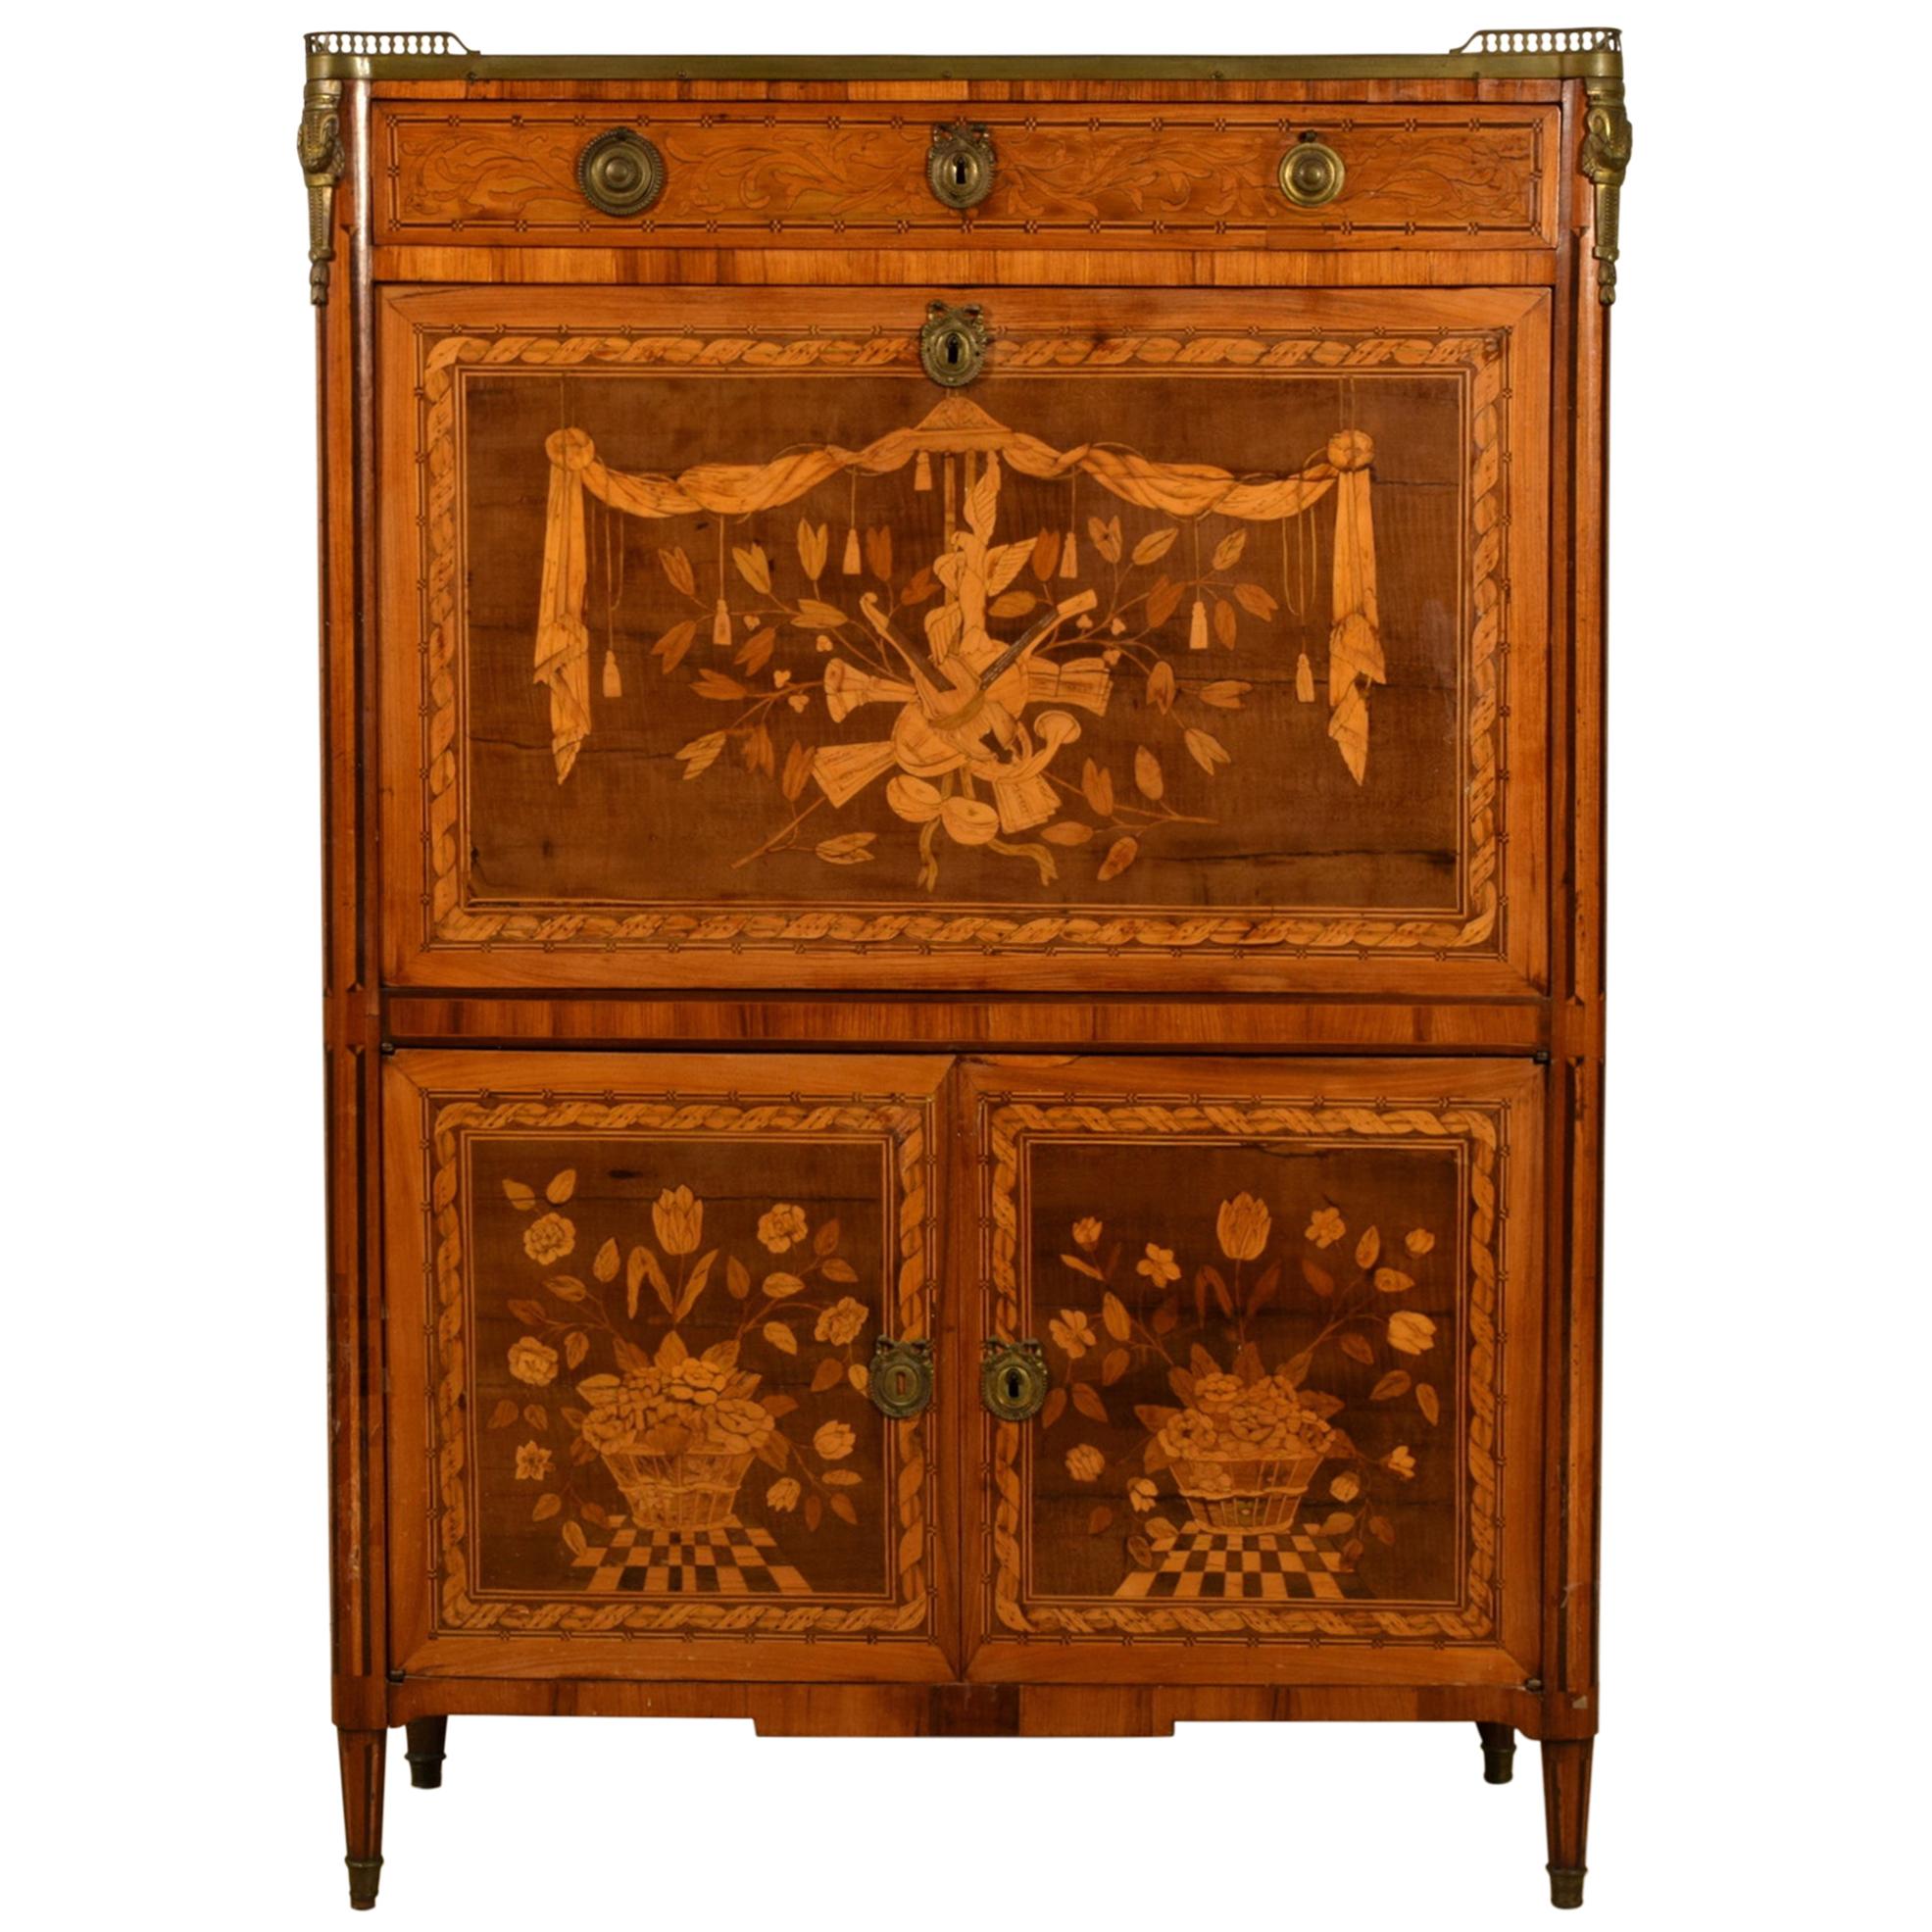 18th Century, French Louis XVI Inlaid Wood Secretaire with Marble Top